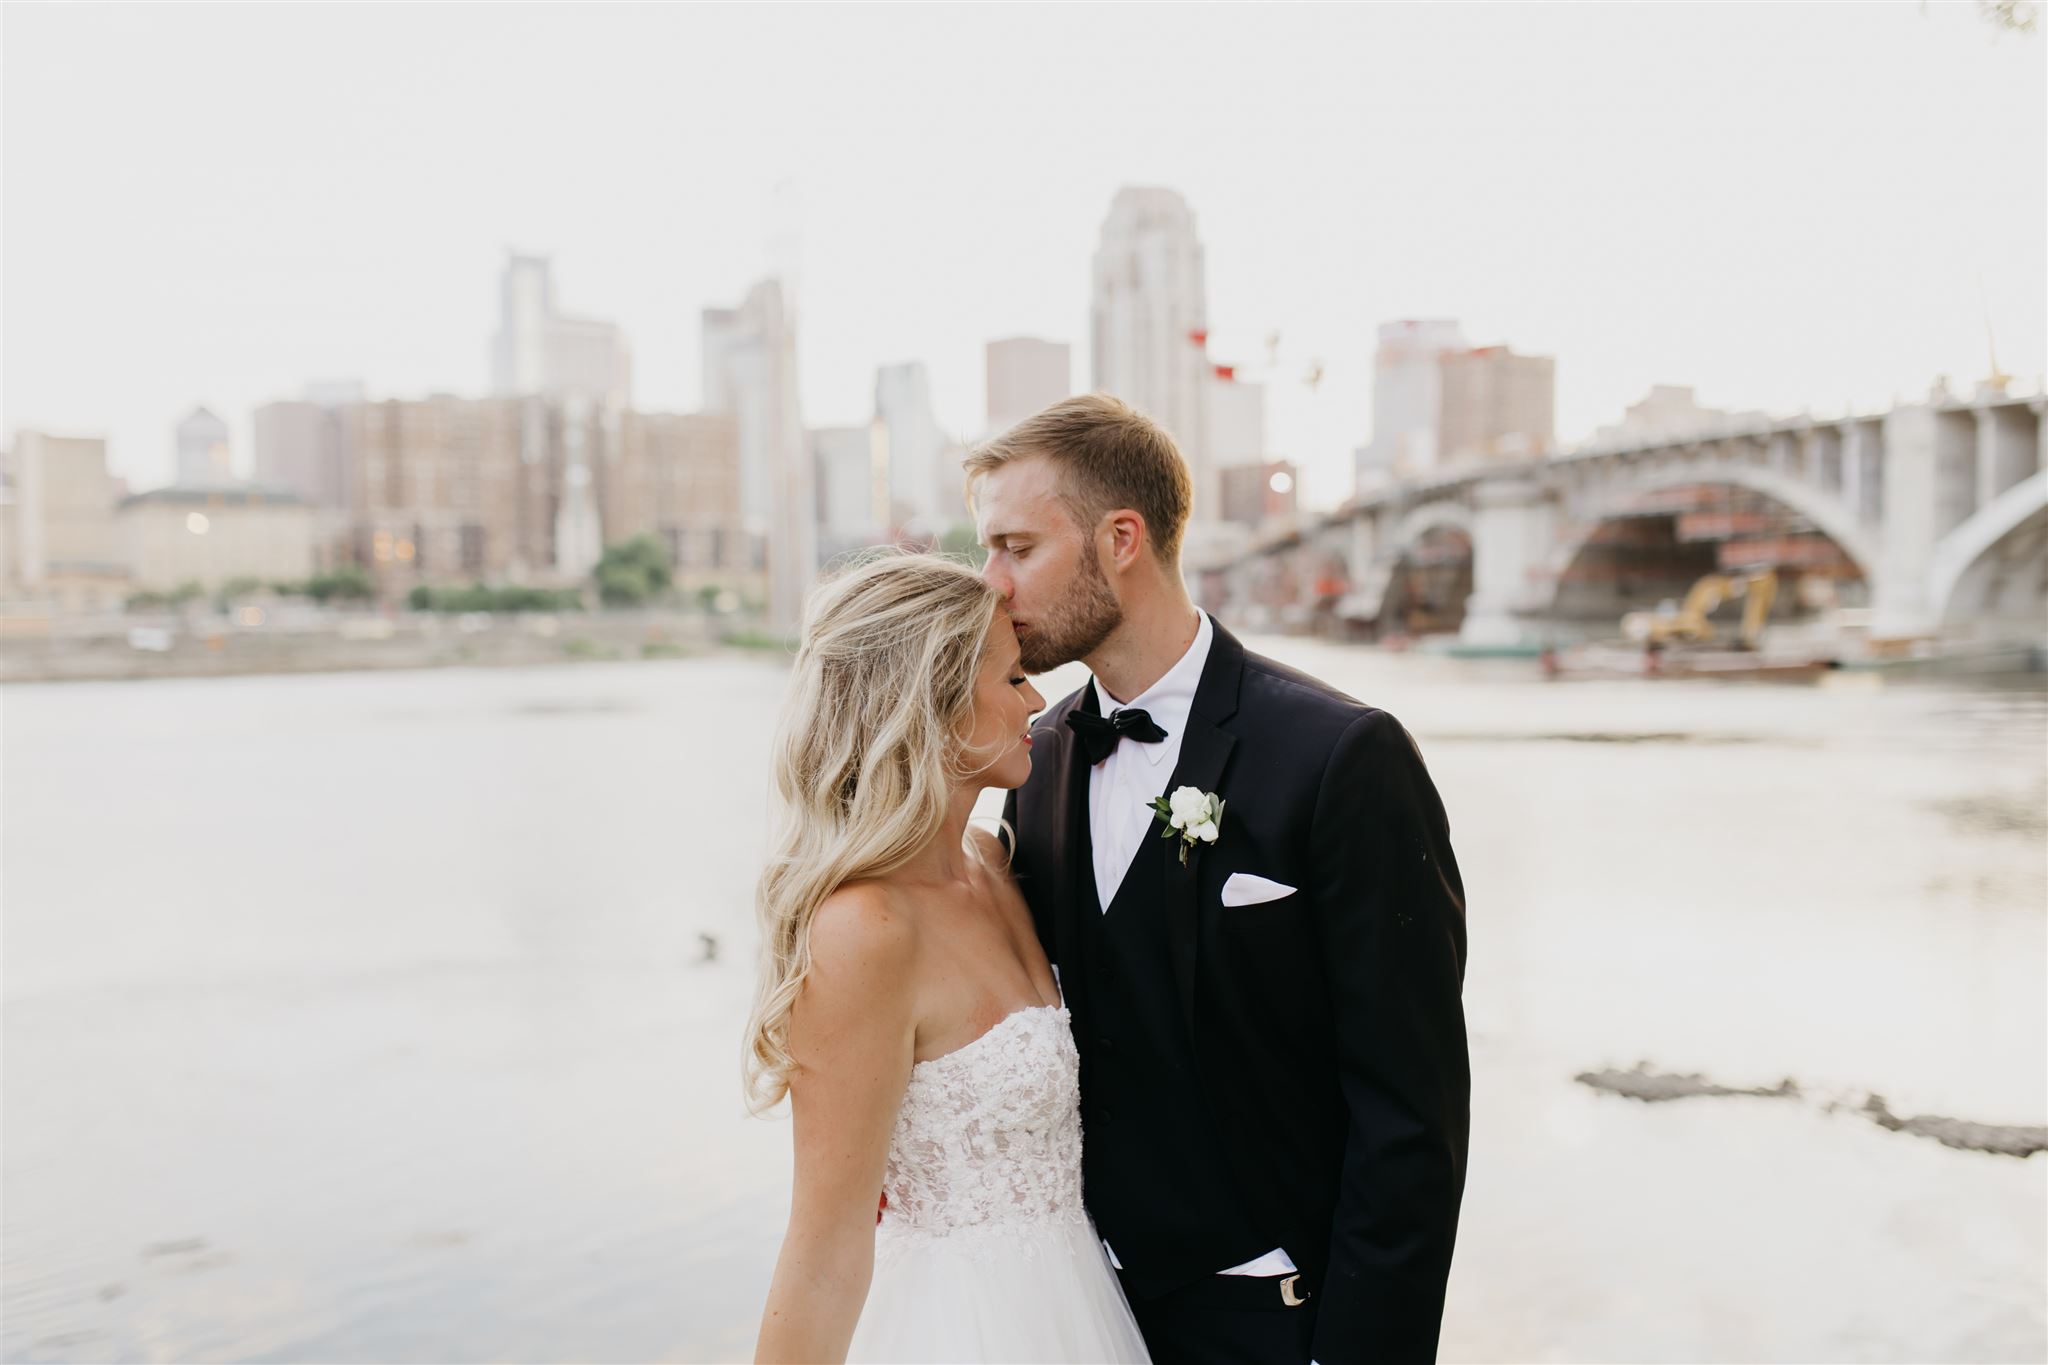 A lovely photo of the groom kissing the bride's forehead outside the views of Minneapolis Event Center